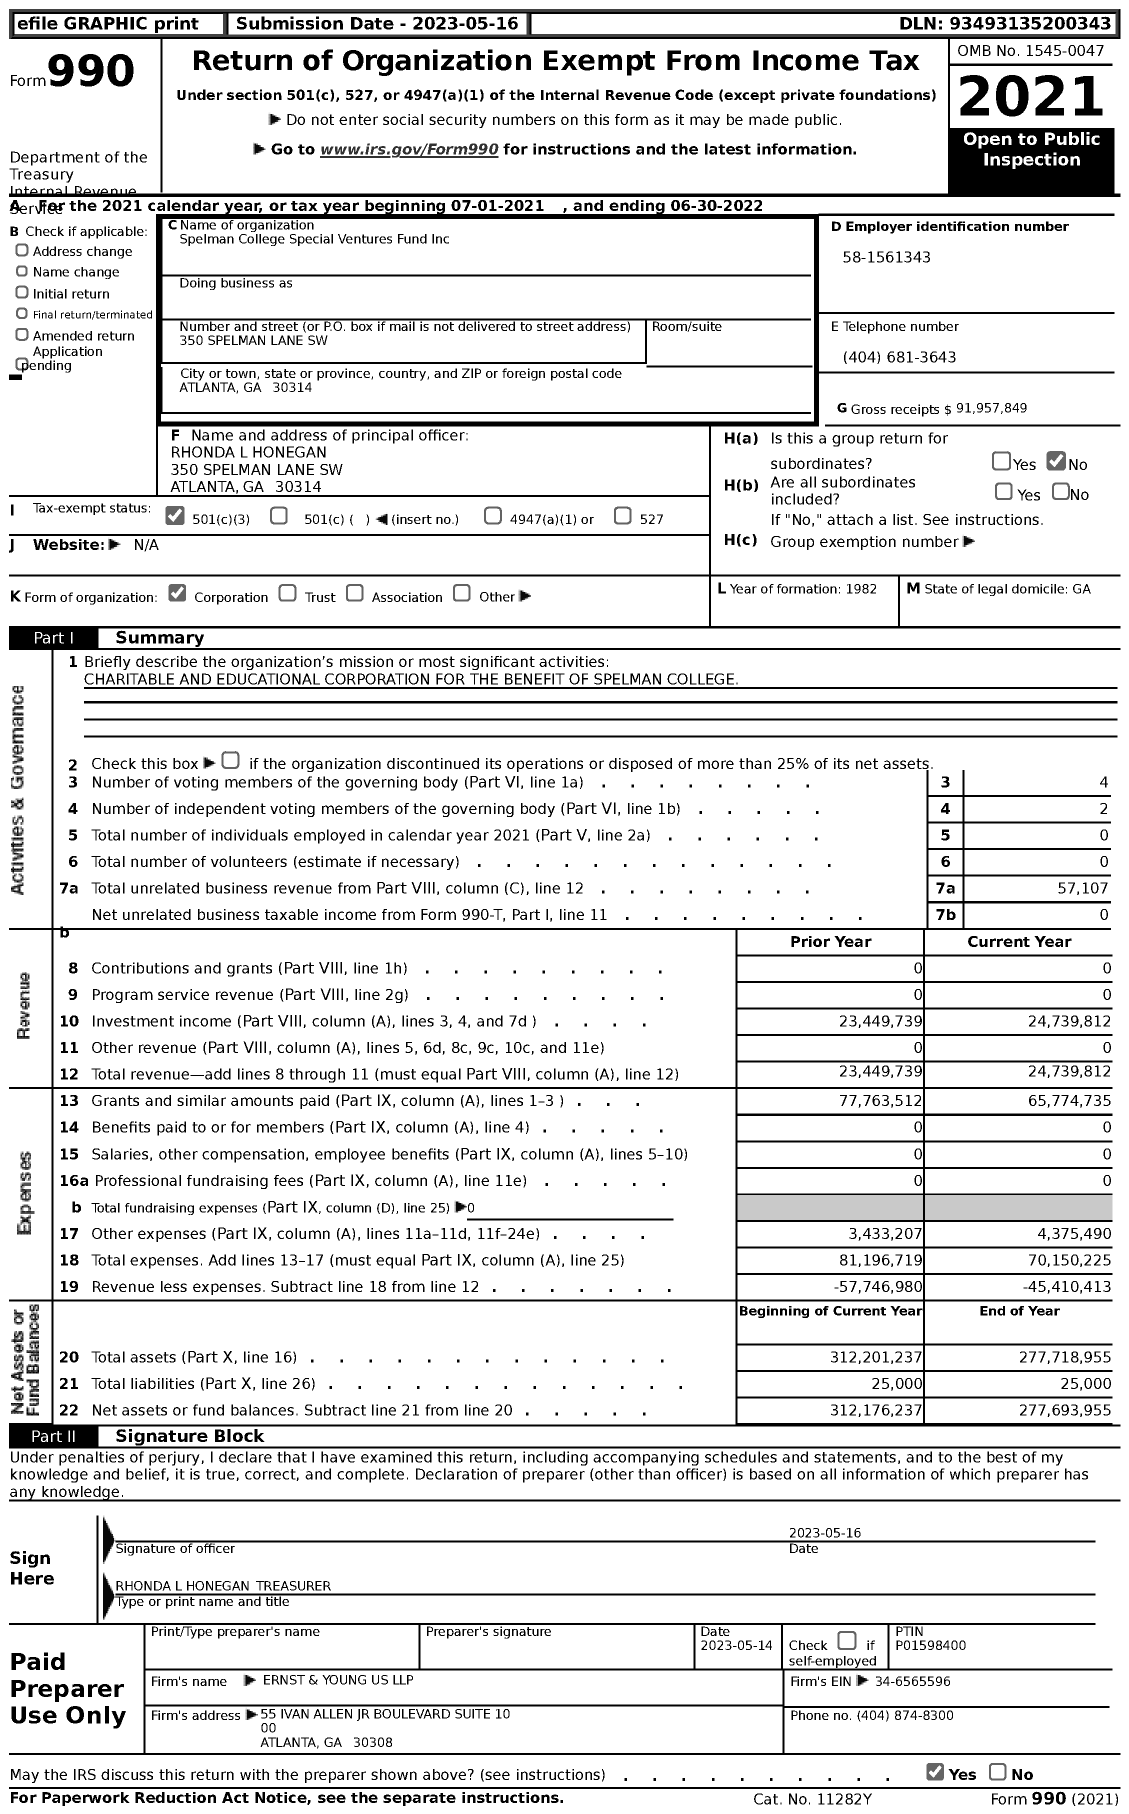 Image of first page of 2021 Form 990 for Spelman College Special Ventures Fund